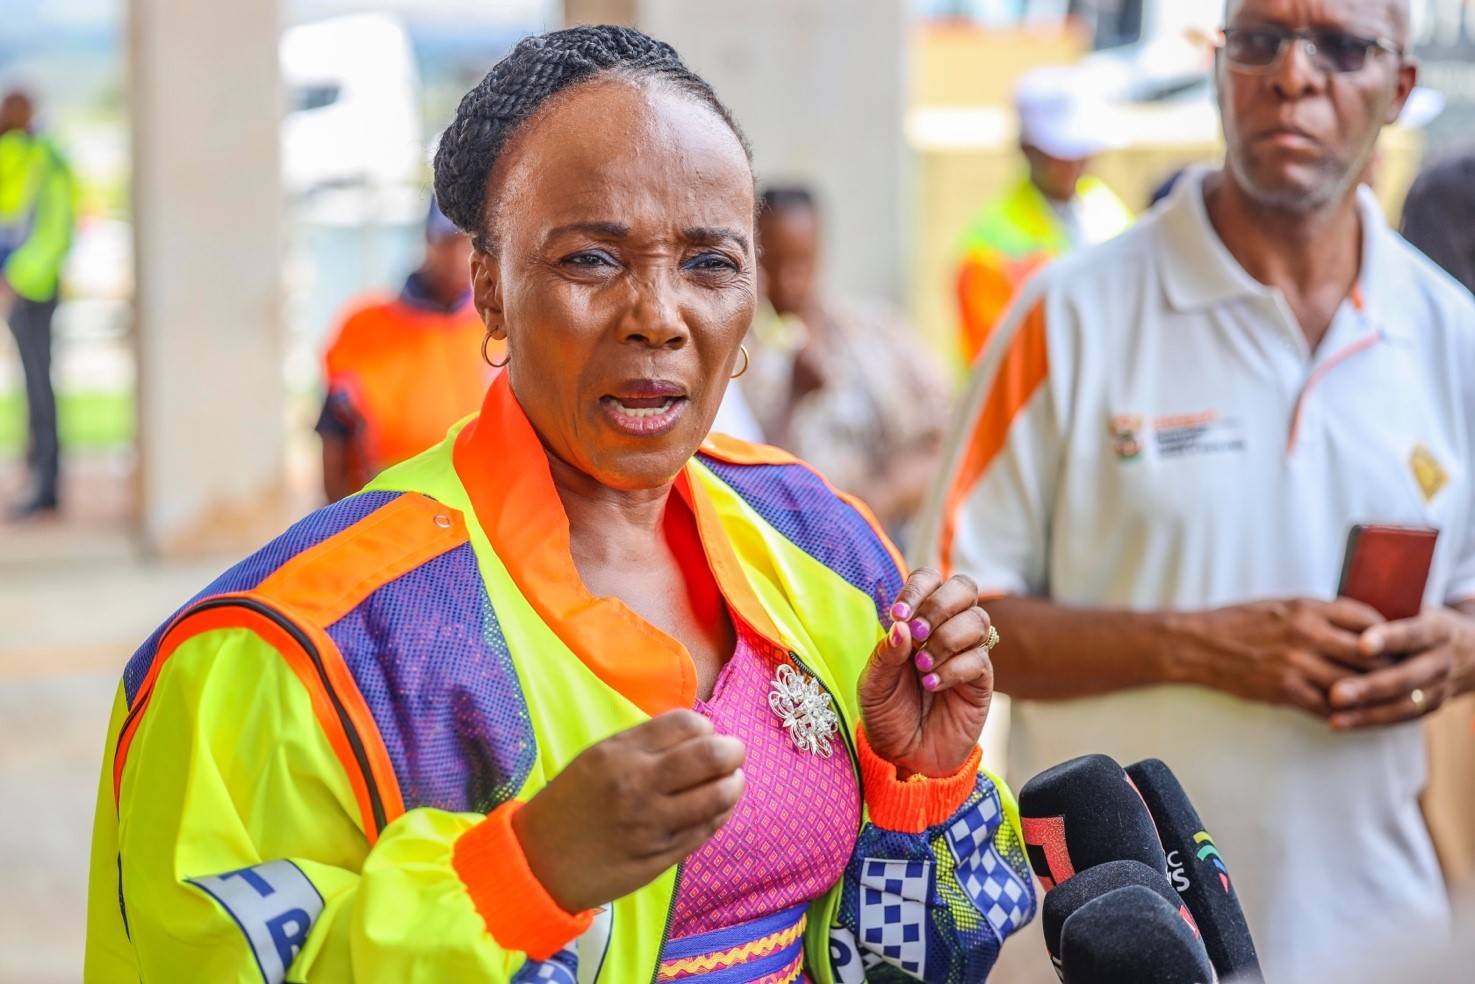 Sindisiwe Chikunga, minister of transport, pleaded with motorists to drive safely during the Easter break